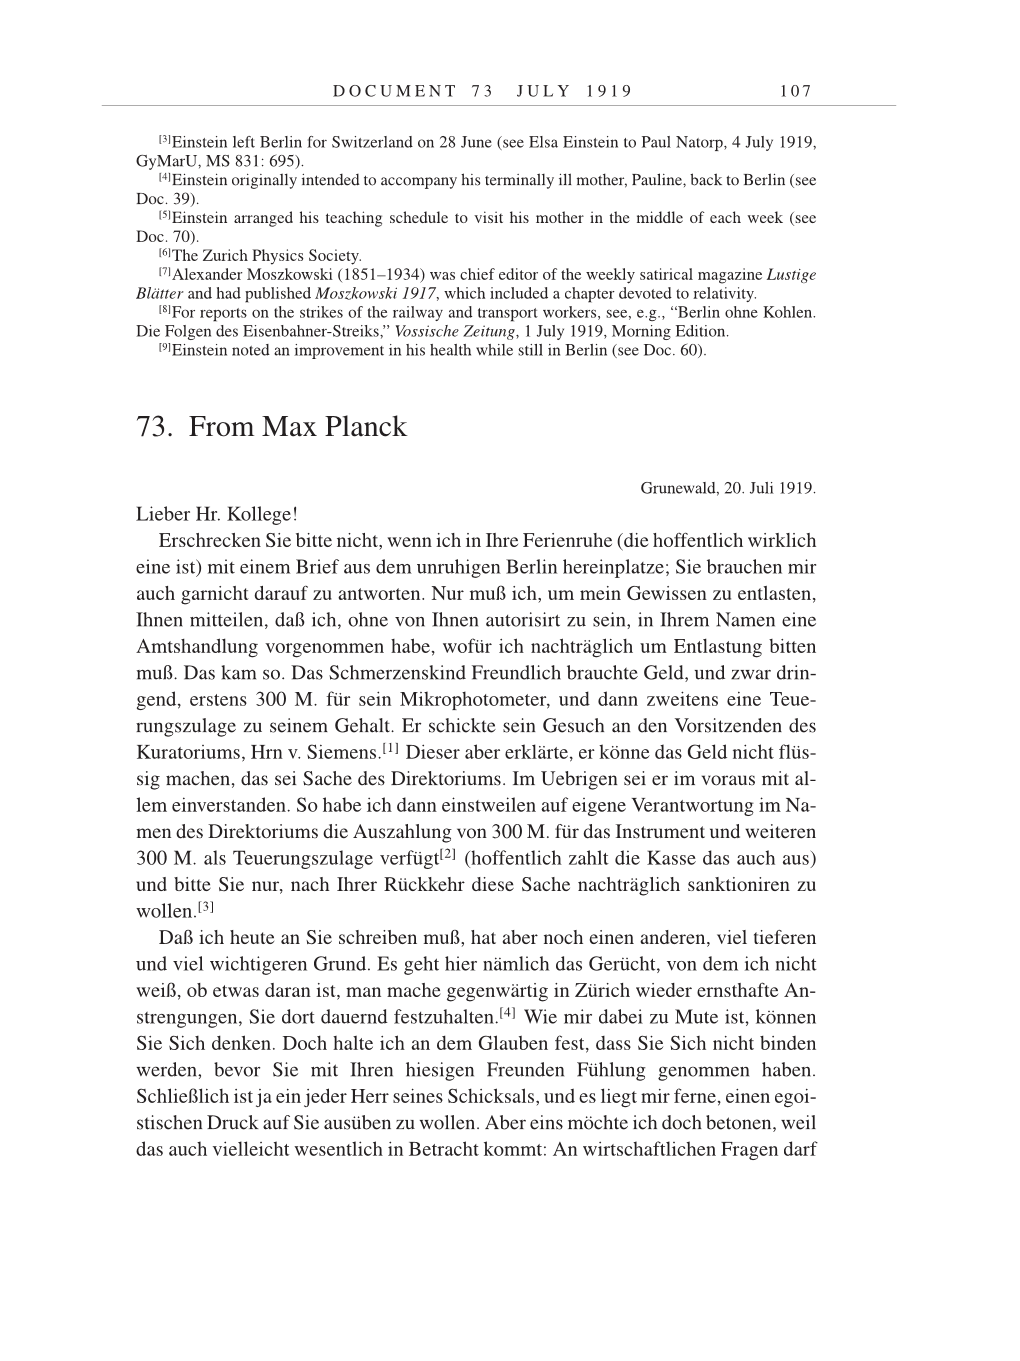 Volume 9: The Berlin Years: Correspondence January 1919-April 1920 page 107